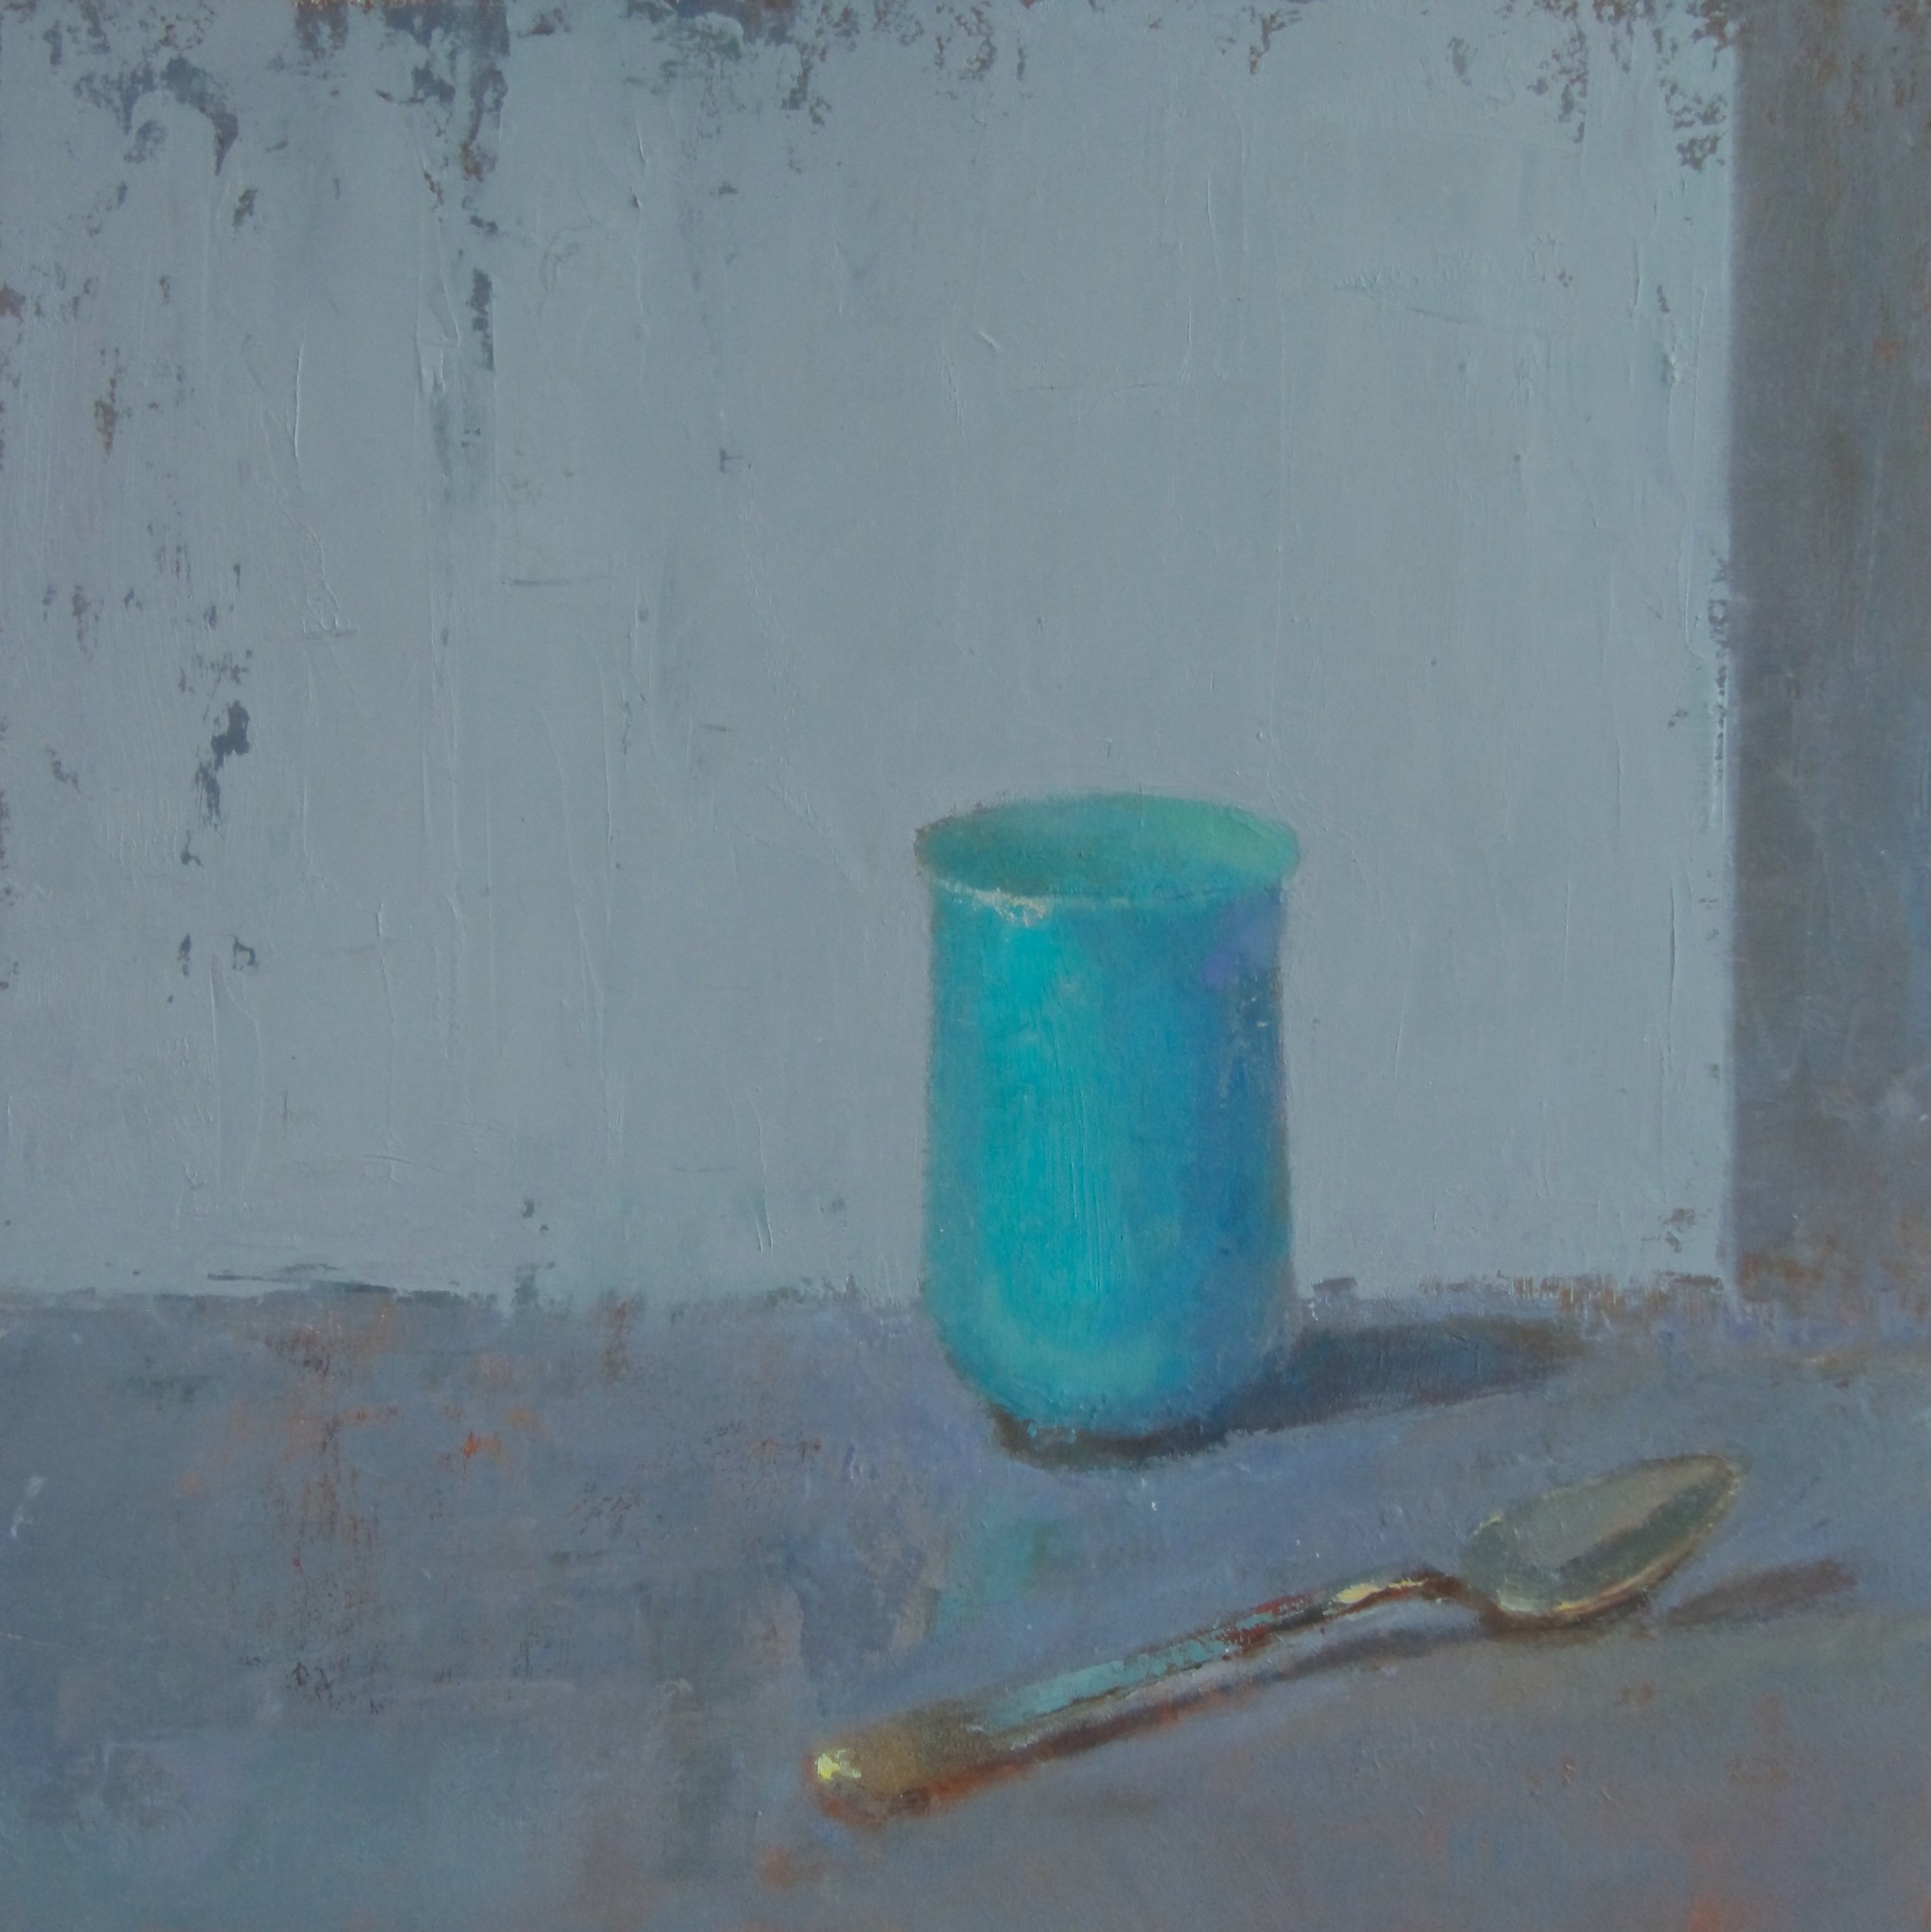 Silver Spoon and the Turquoise Cup.JPG